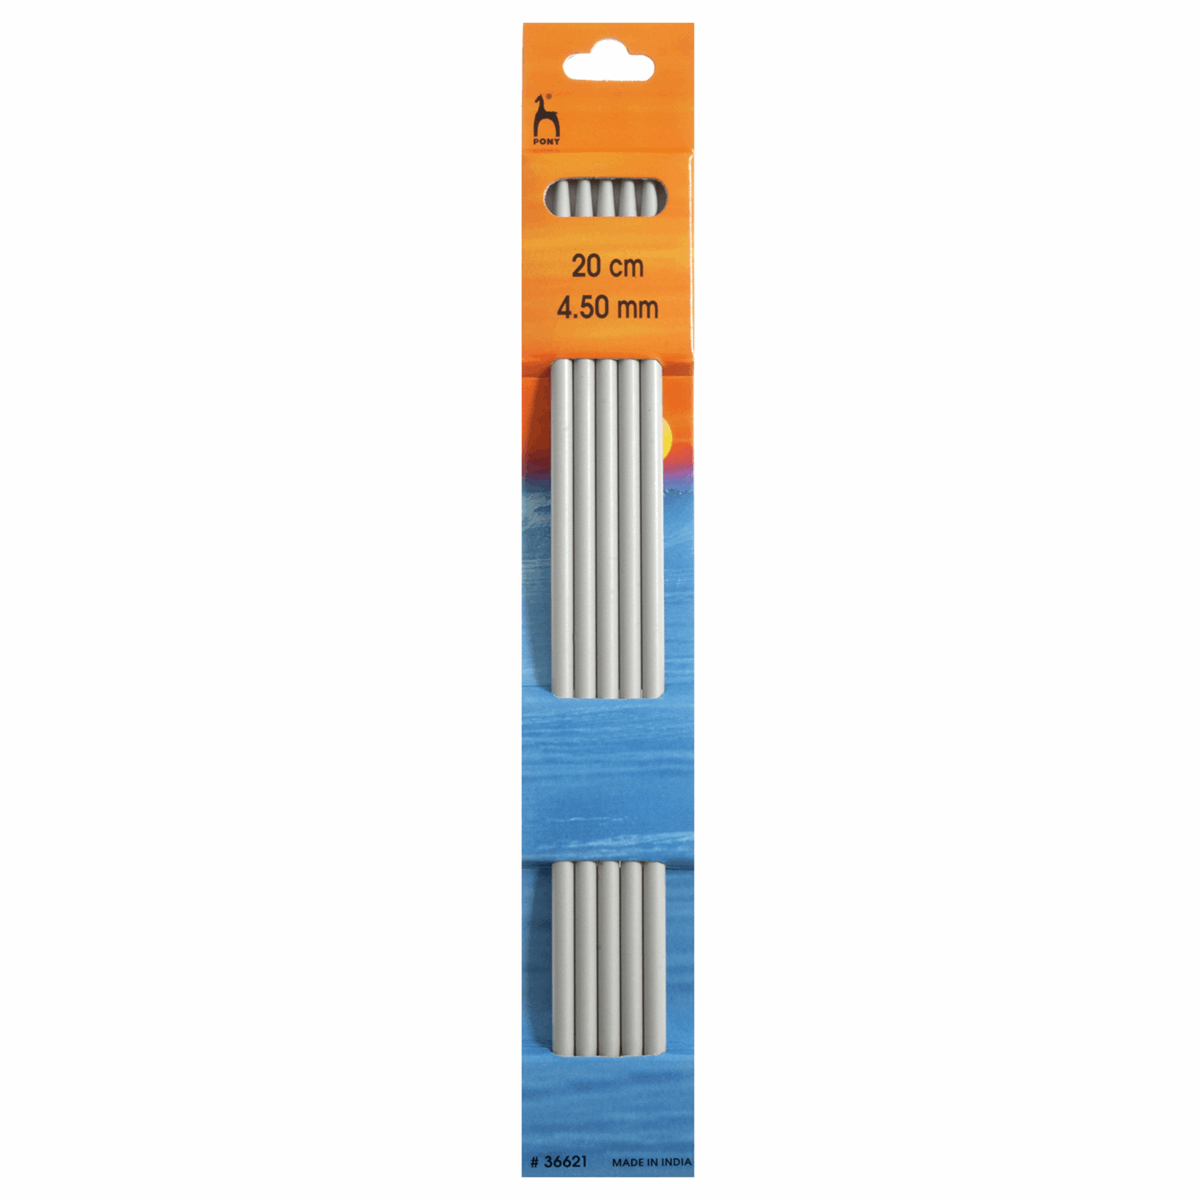 PONY Double-Ended Knitting Pins - 20cm x 4.50mm (Set of 5)